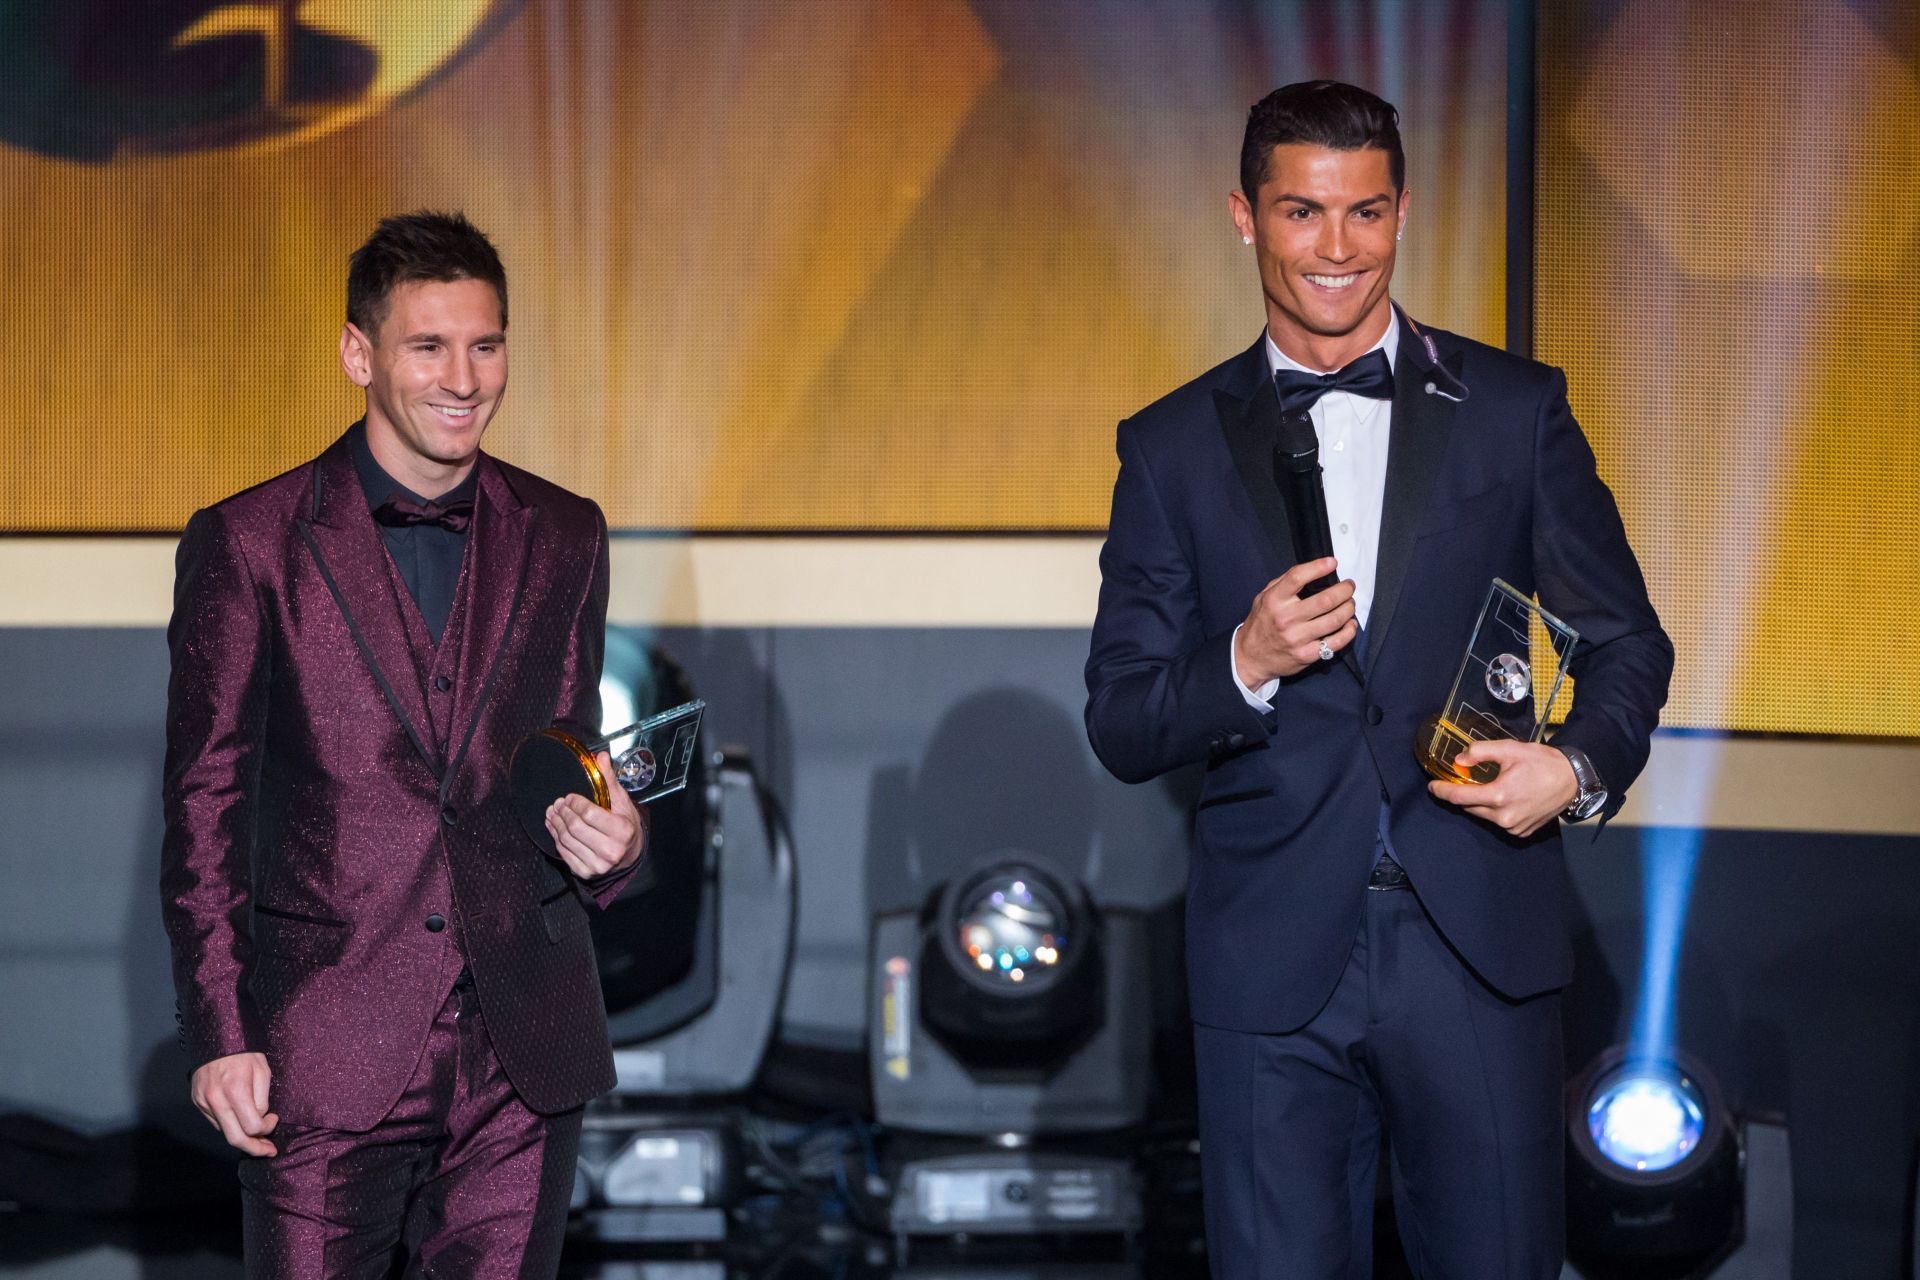 Ronaldo and Messi will be looking to be in good shape ahead of the FIFA World Cup in Qatar